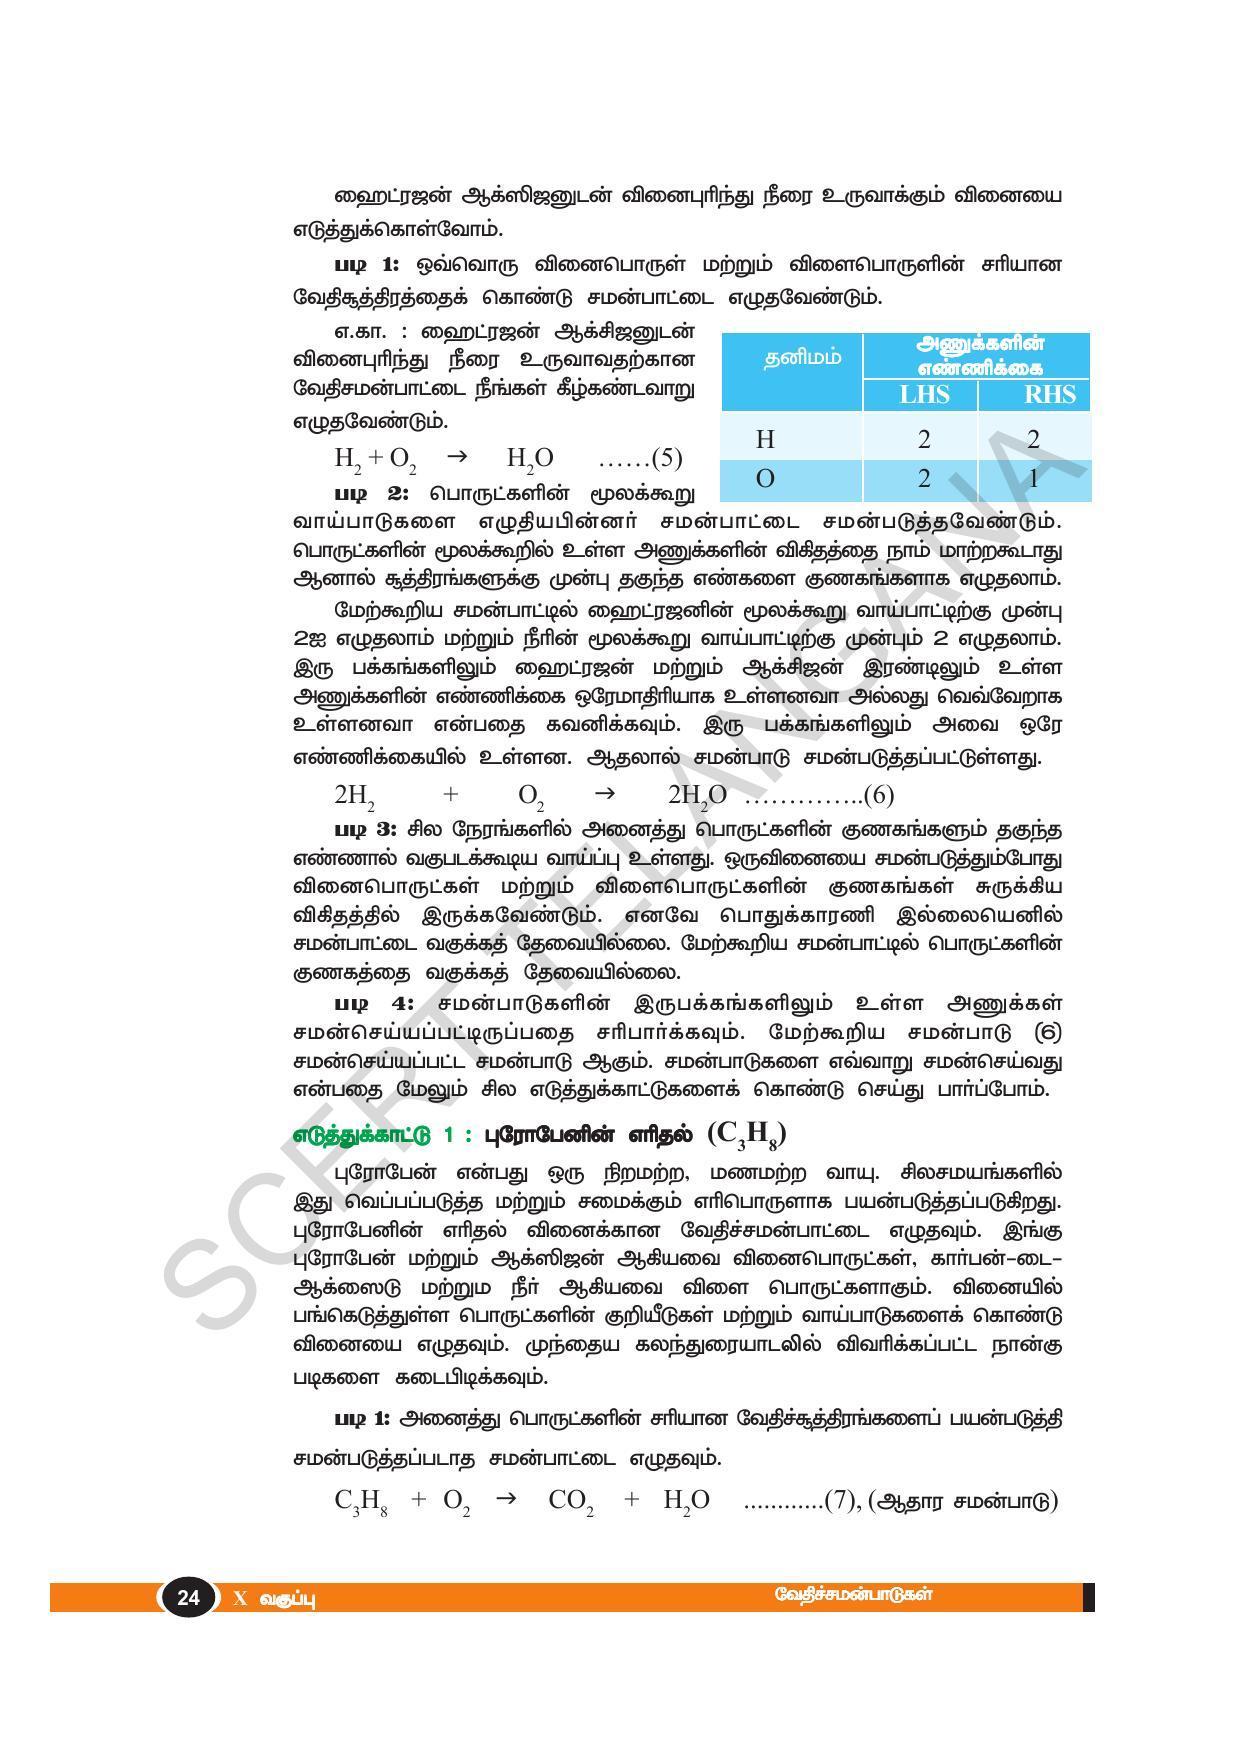 TS SCERT Class 10 Physical Science(Tamil Medium) Text Book - Page 36